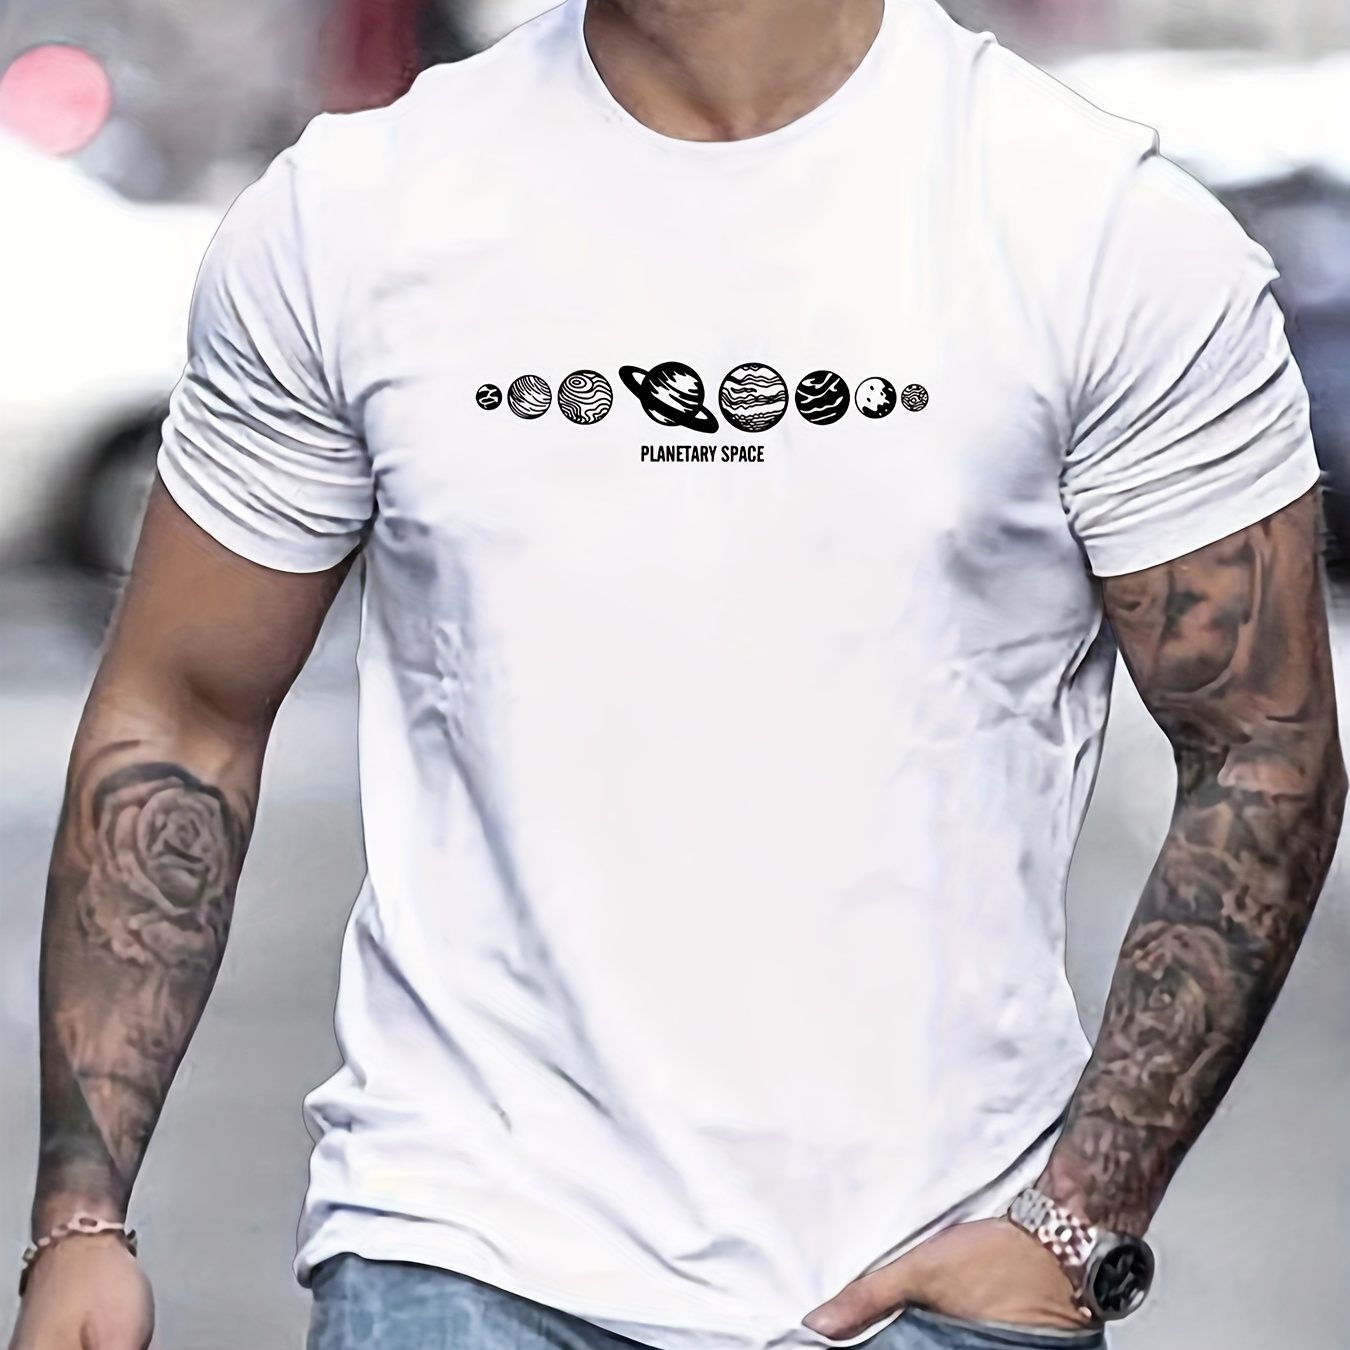 

Planet Space Pattern Print T-shirt, Tees For Men, 100% Cotton Comfortable Casual Short Sleeve T-shirt For Summer